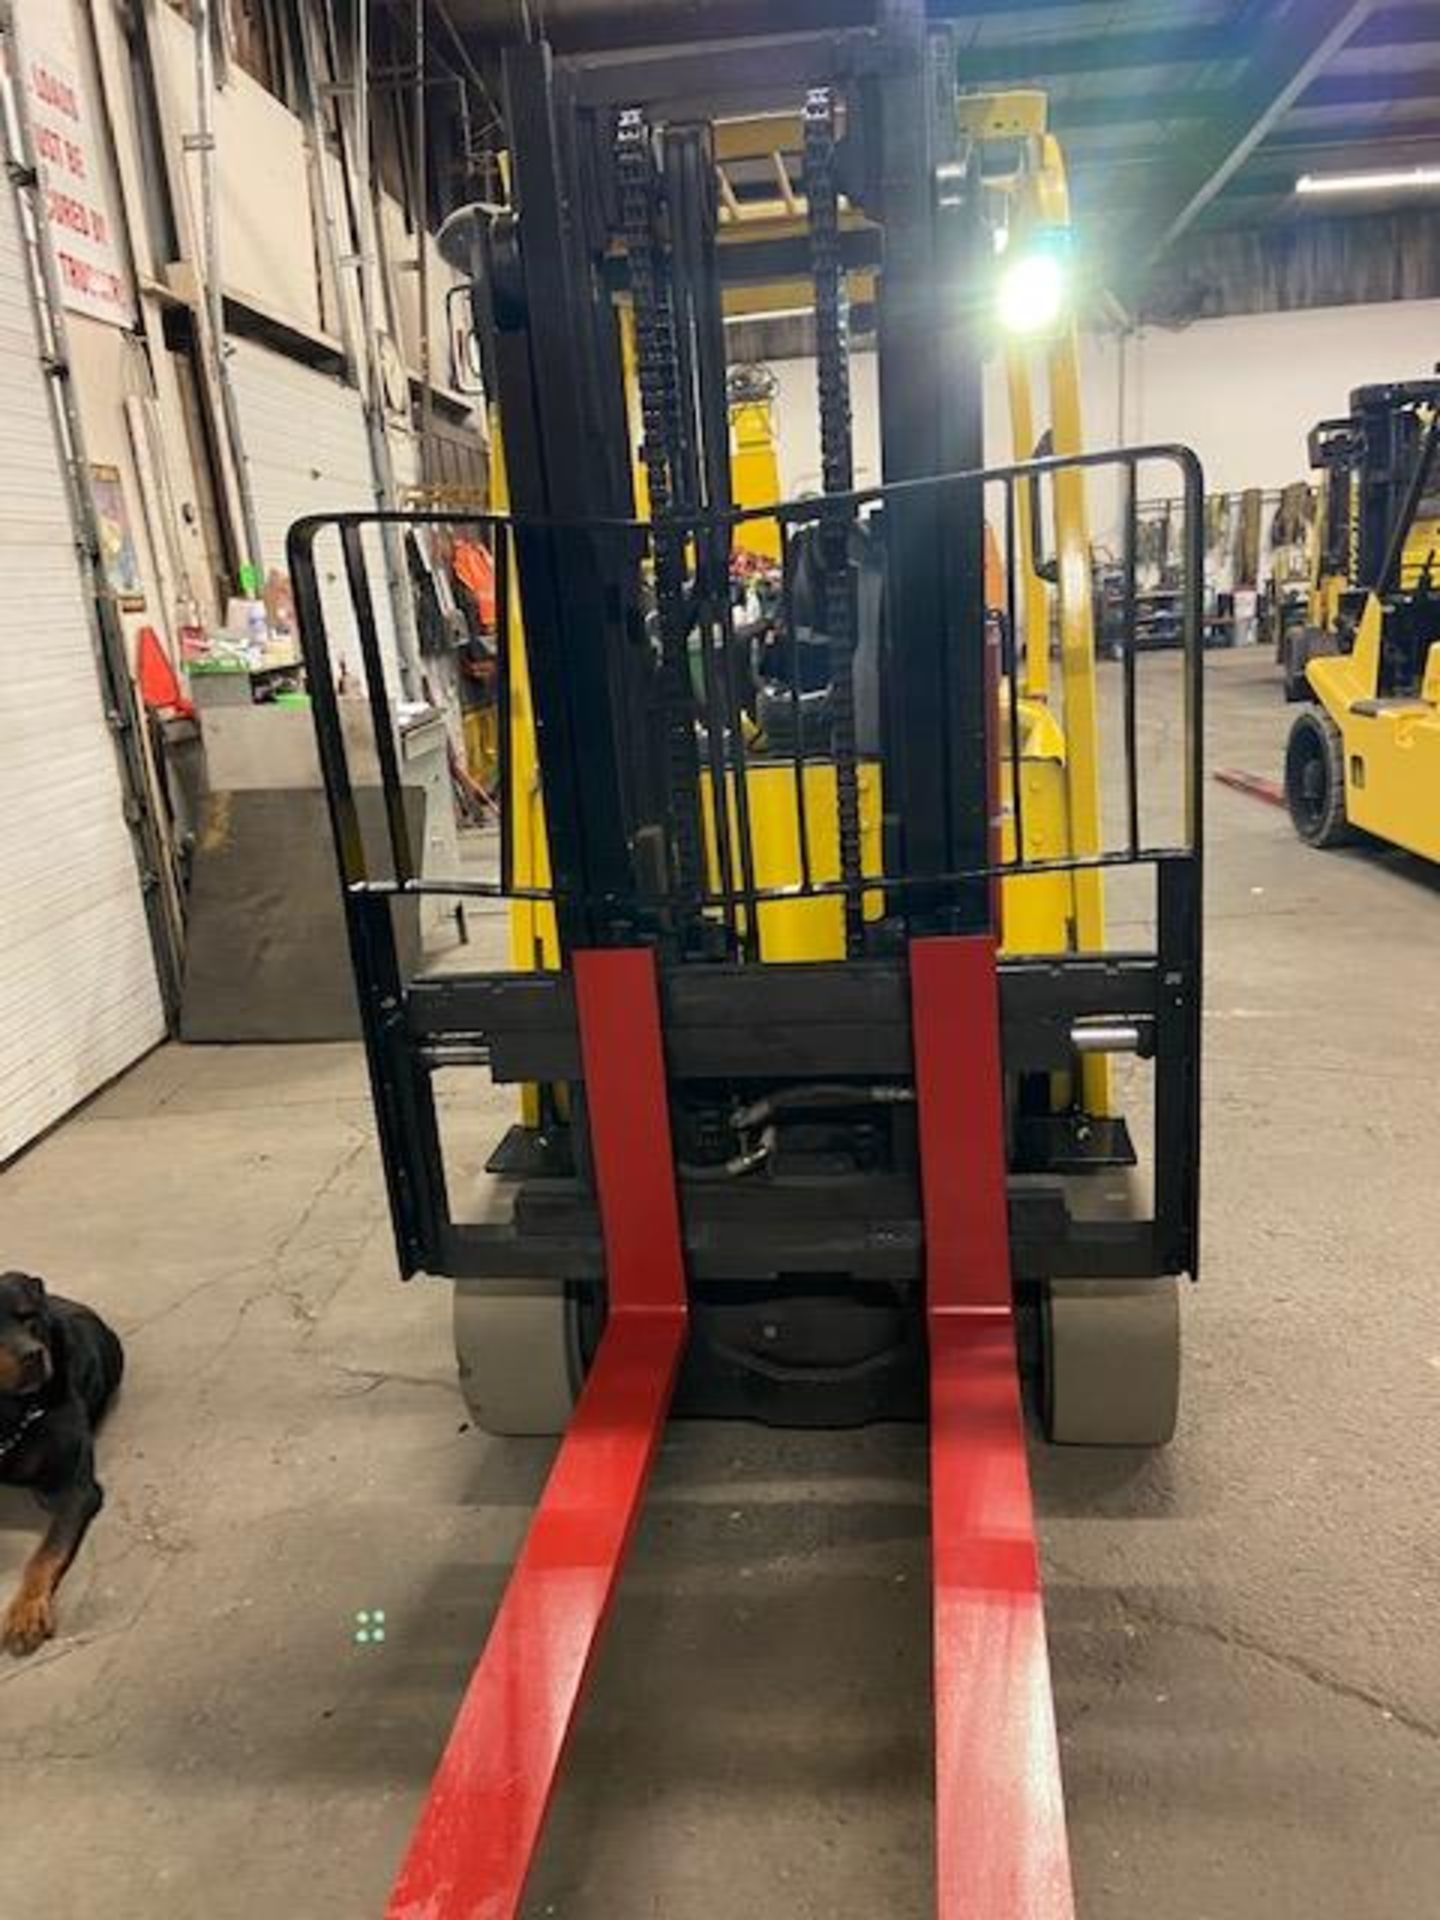 FREE CUSTOMS - 2014 Hyster 8000lbs Capacity Forklift Electric with sideshift and 3 stage mast - Image 2 of 2